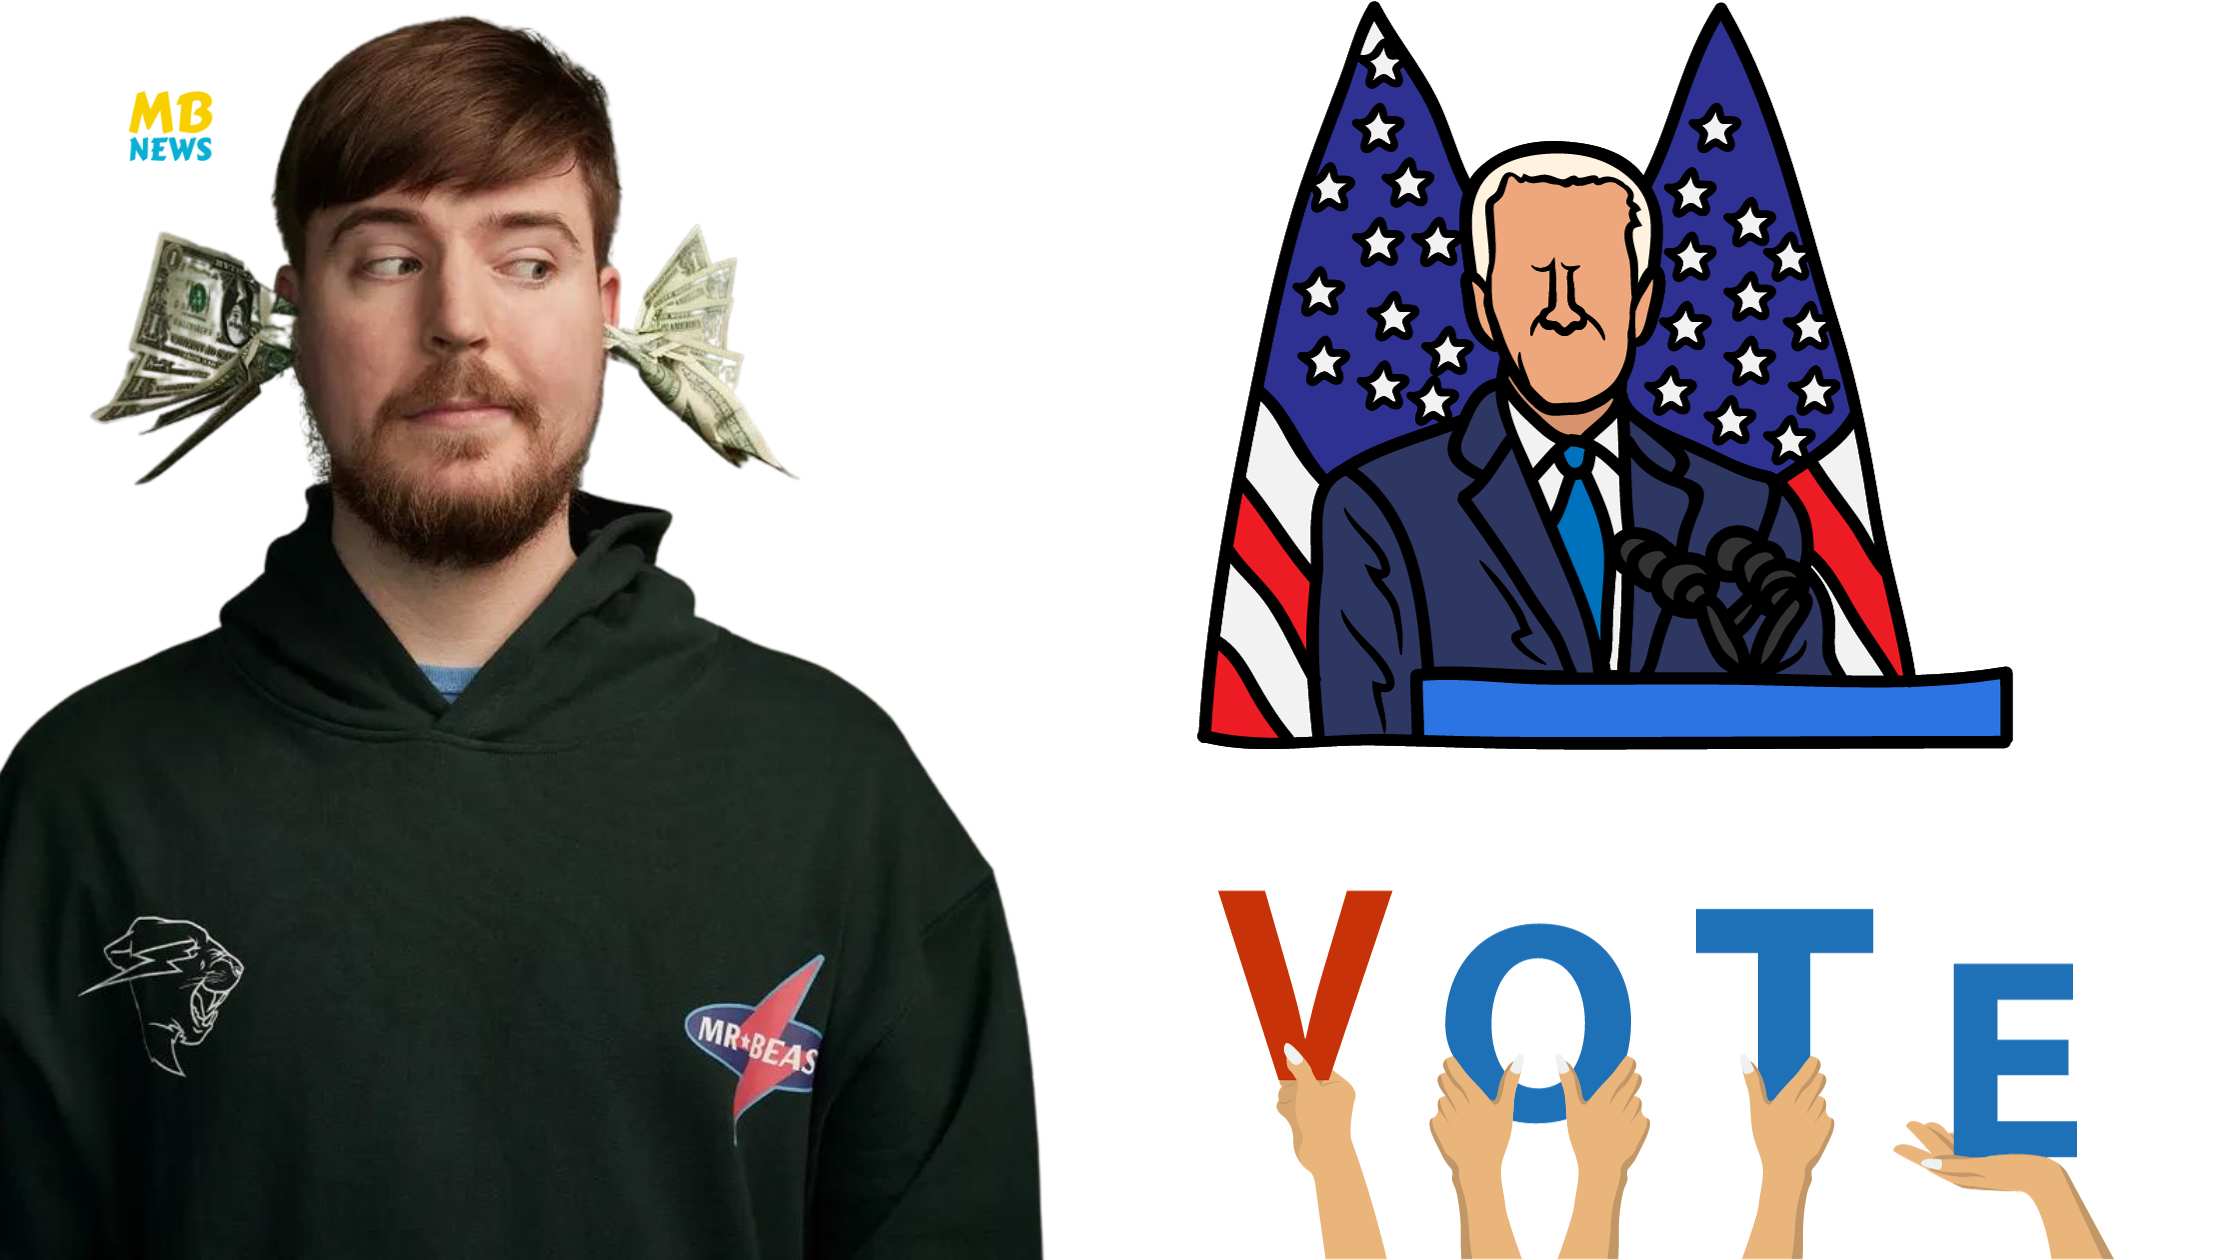 Reddit Buzz: Would You Cast Your Vote for MrBeast as President?